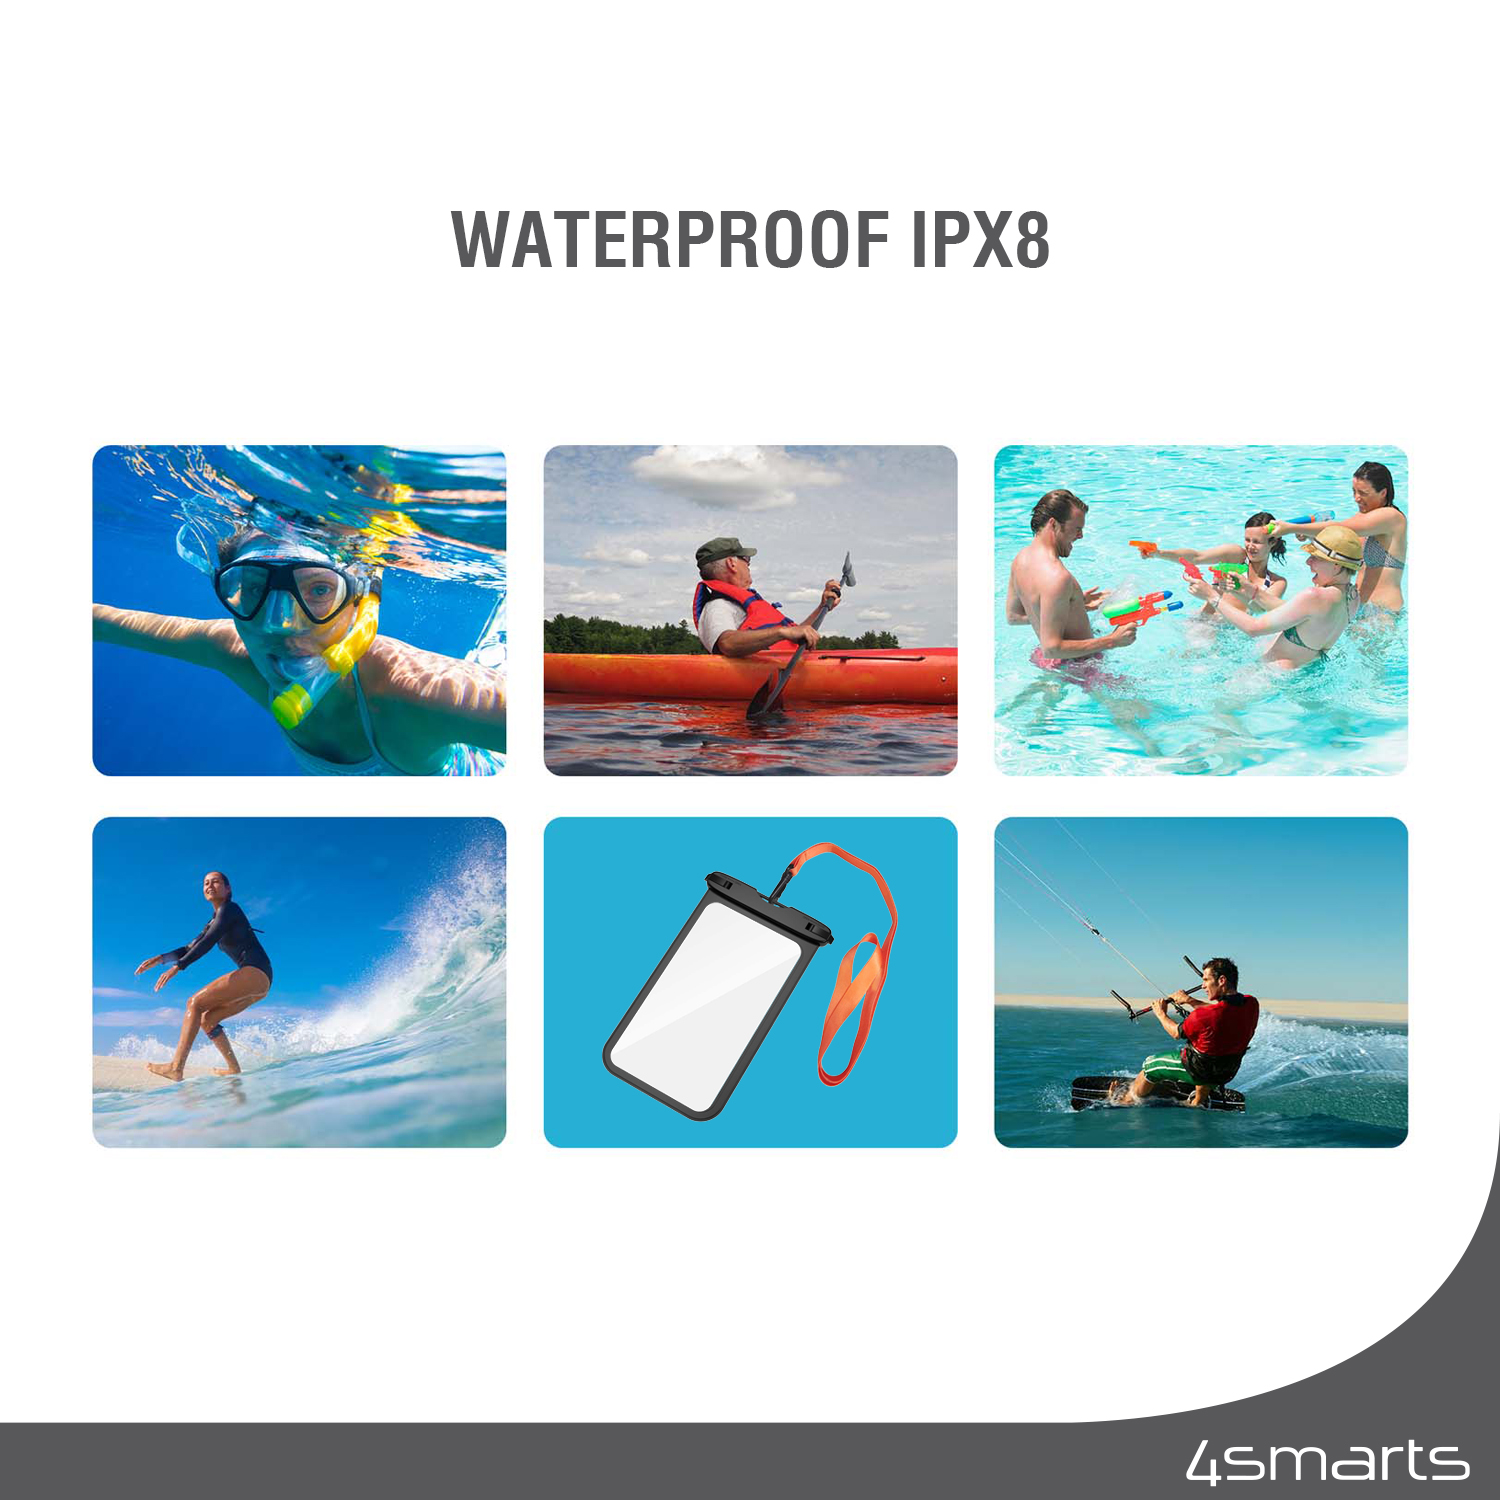 The 4smarts Active Pro waterproof case protects your device.